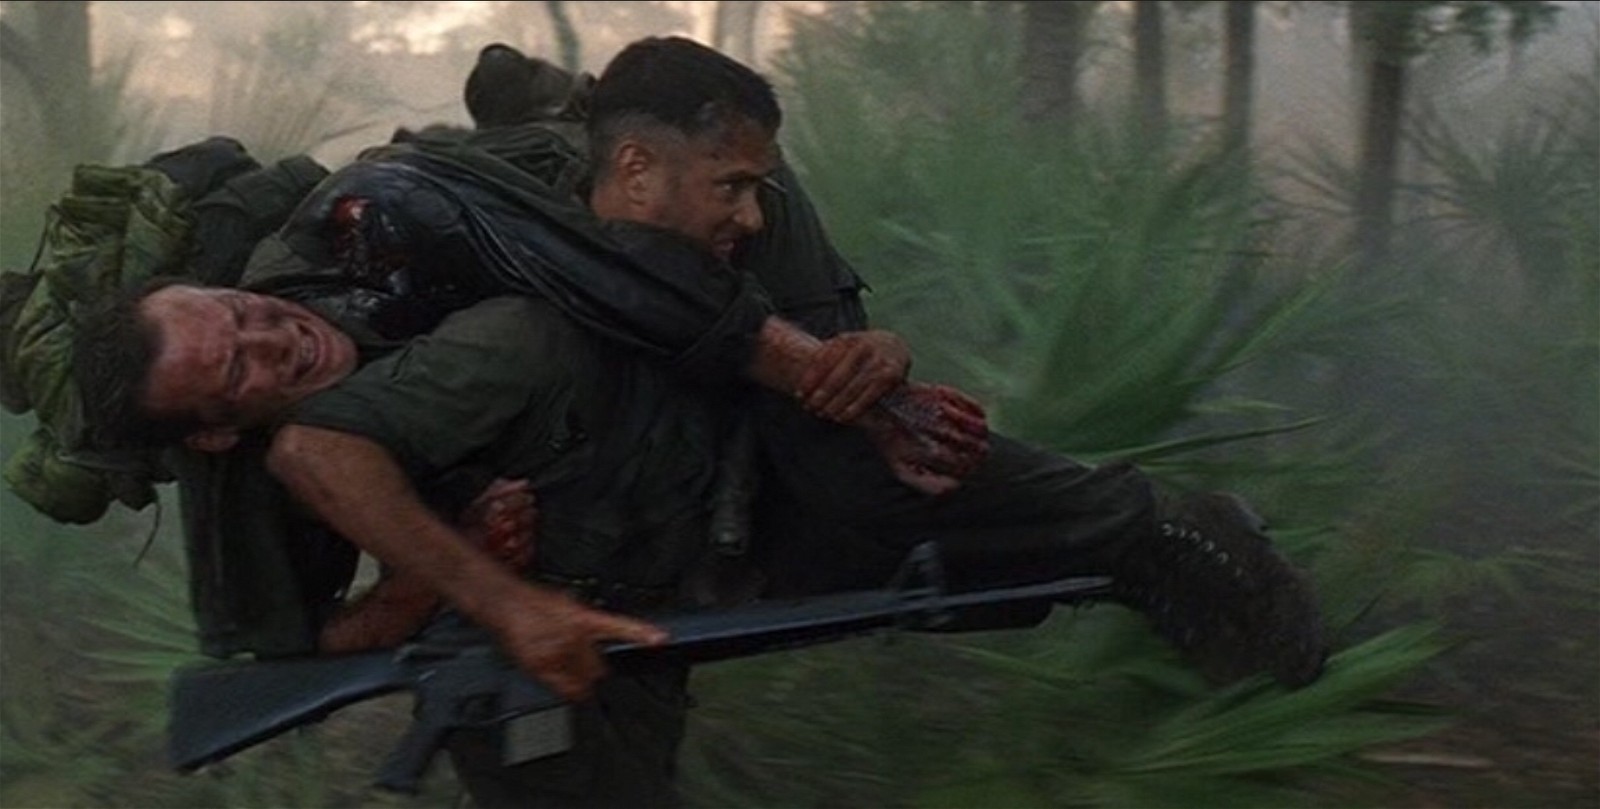 Forrest Gump carrying his fallen comrade to safety during the Vietnam War in Forrest Gump